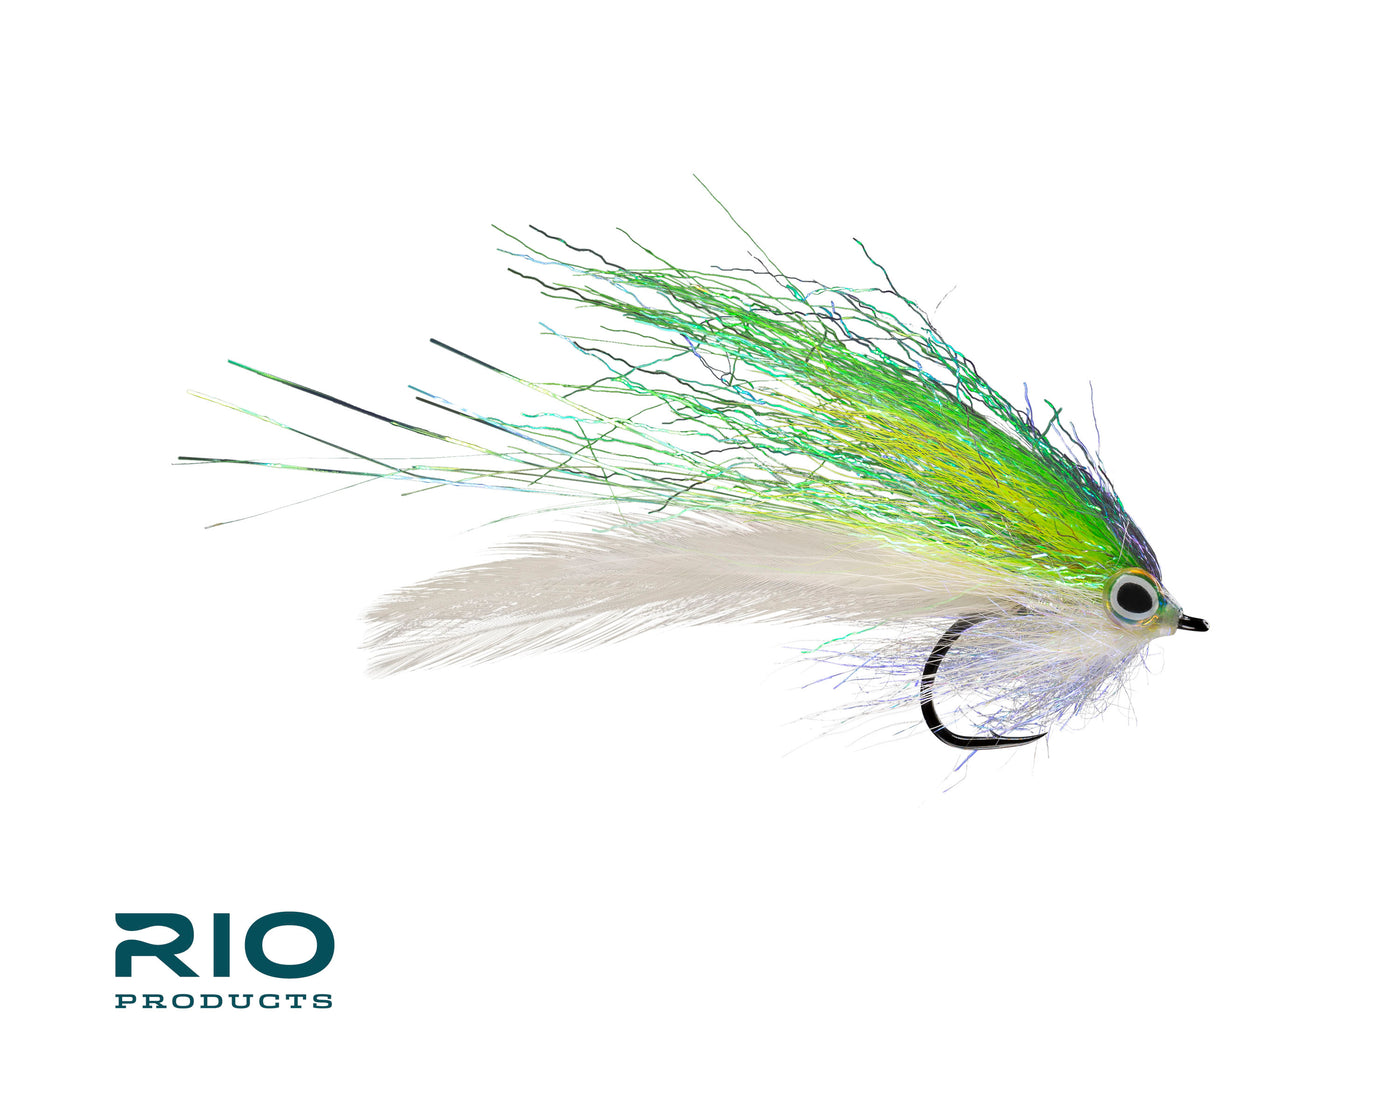 Rio's Playbate Flies – White Water Outfitters